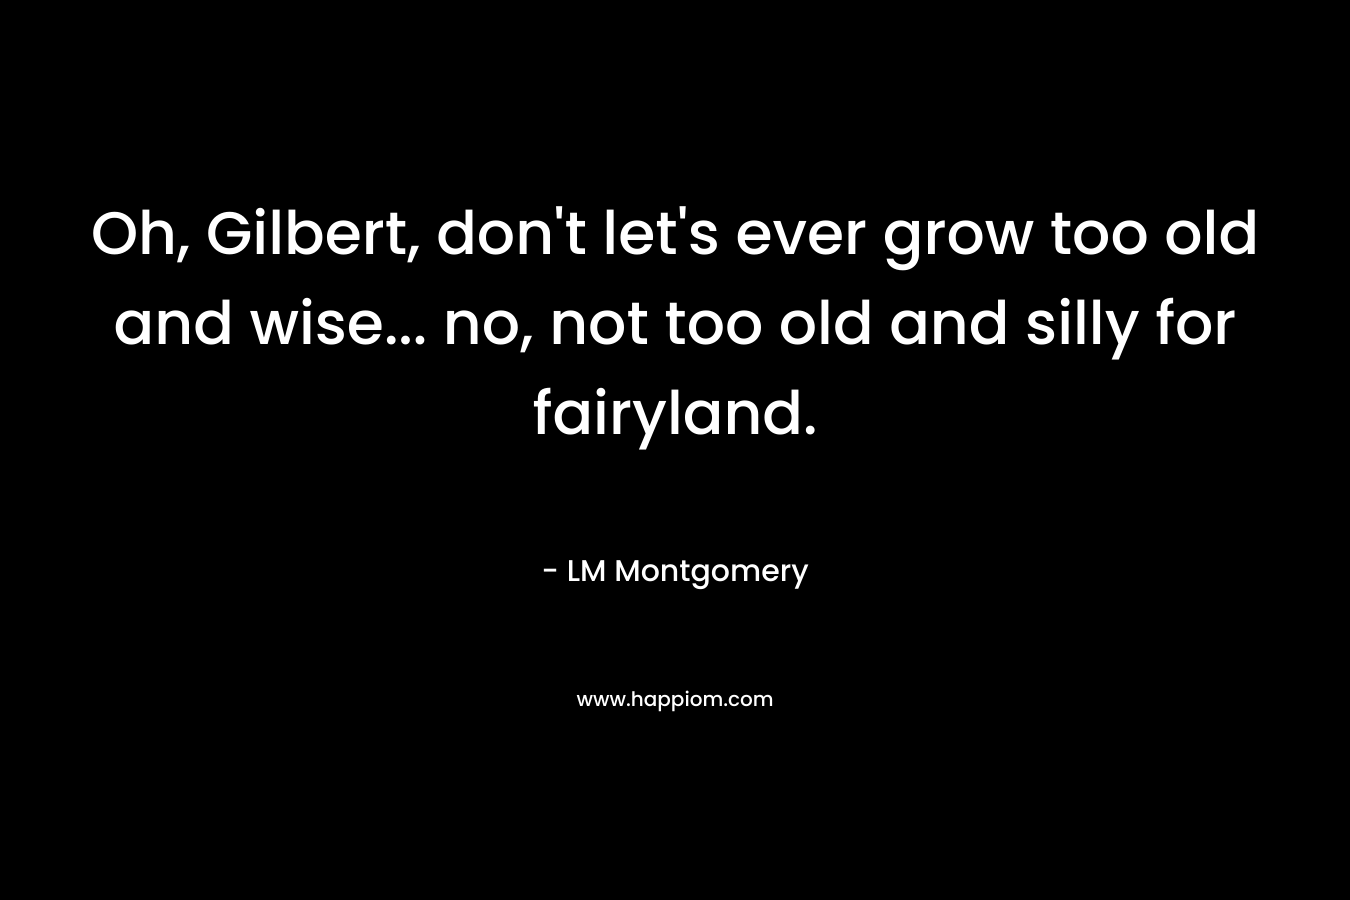 Oh, Gilbert, don’t let’s ever grow too old and wise… no, not too old and silly for fairyland. – LM Montgomery